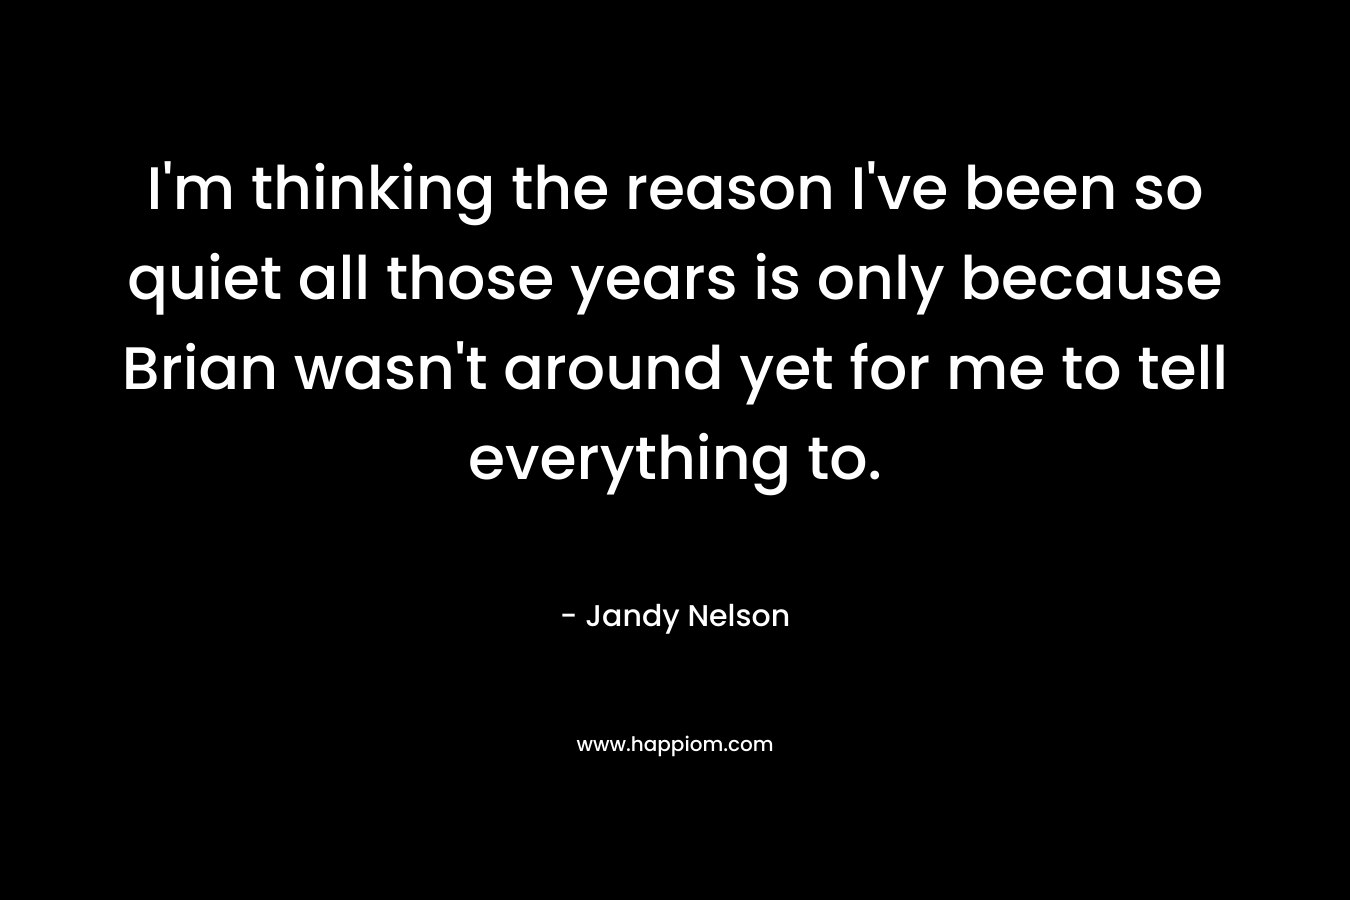 I’m thinking the reason I’ve been so quiet all those years is only because Brian wasn’t around yet for me to tell everything to. – Jandy Nelson